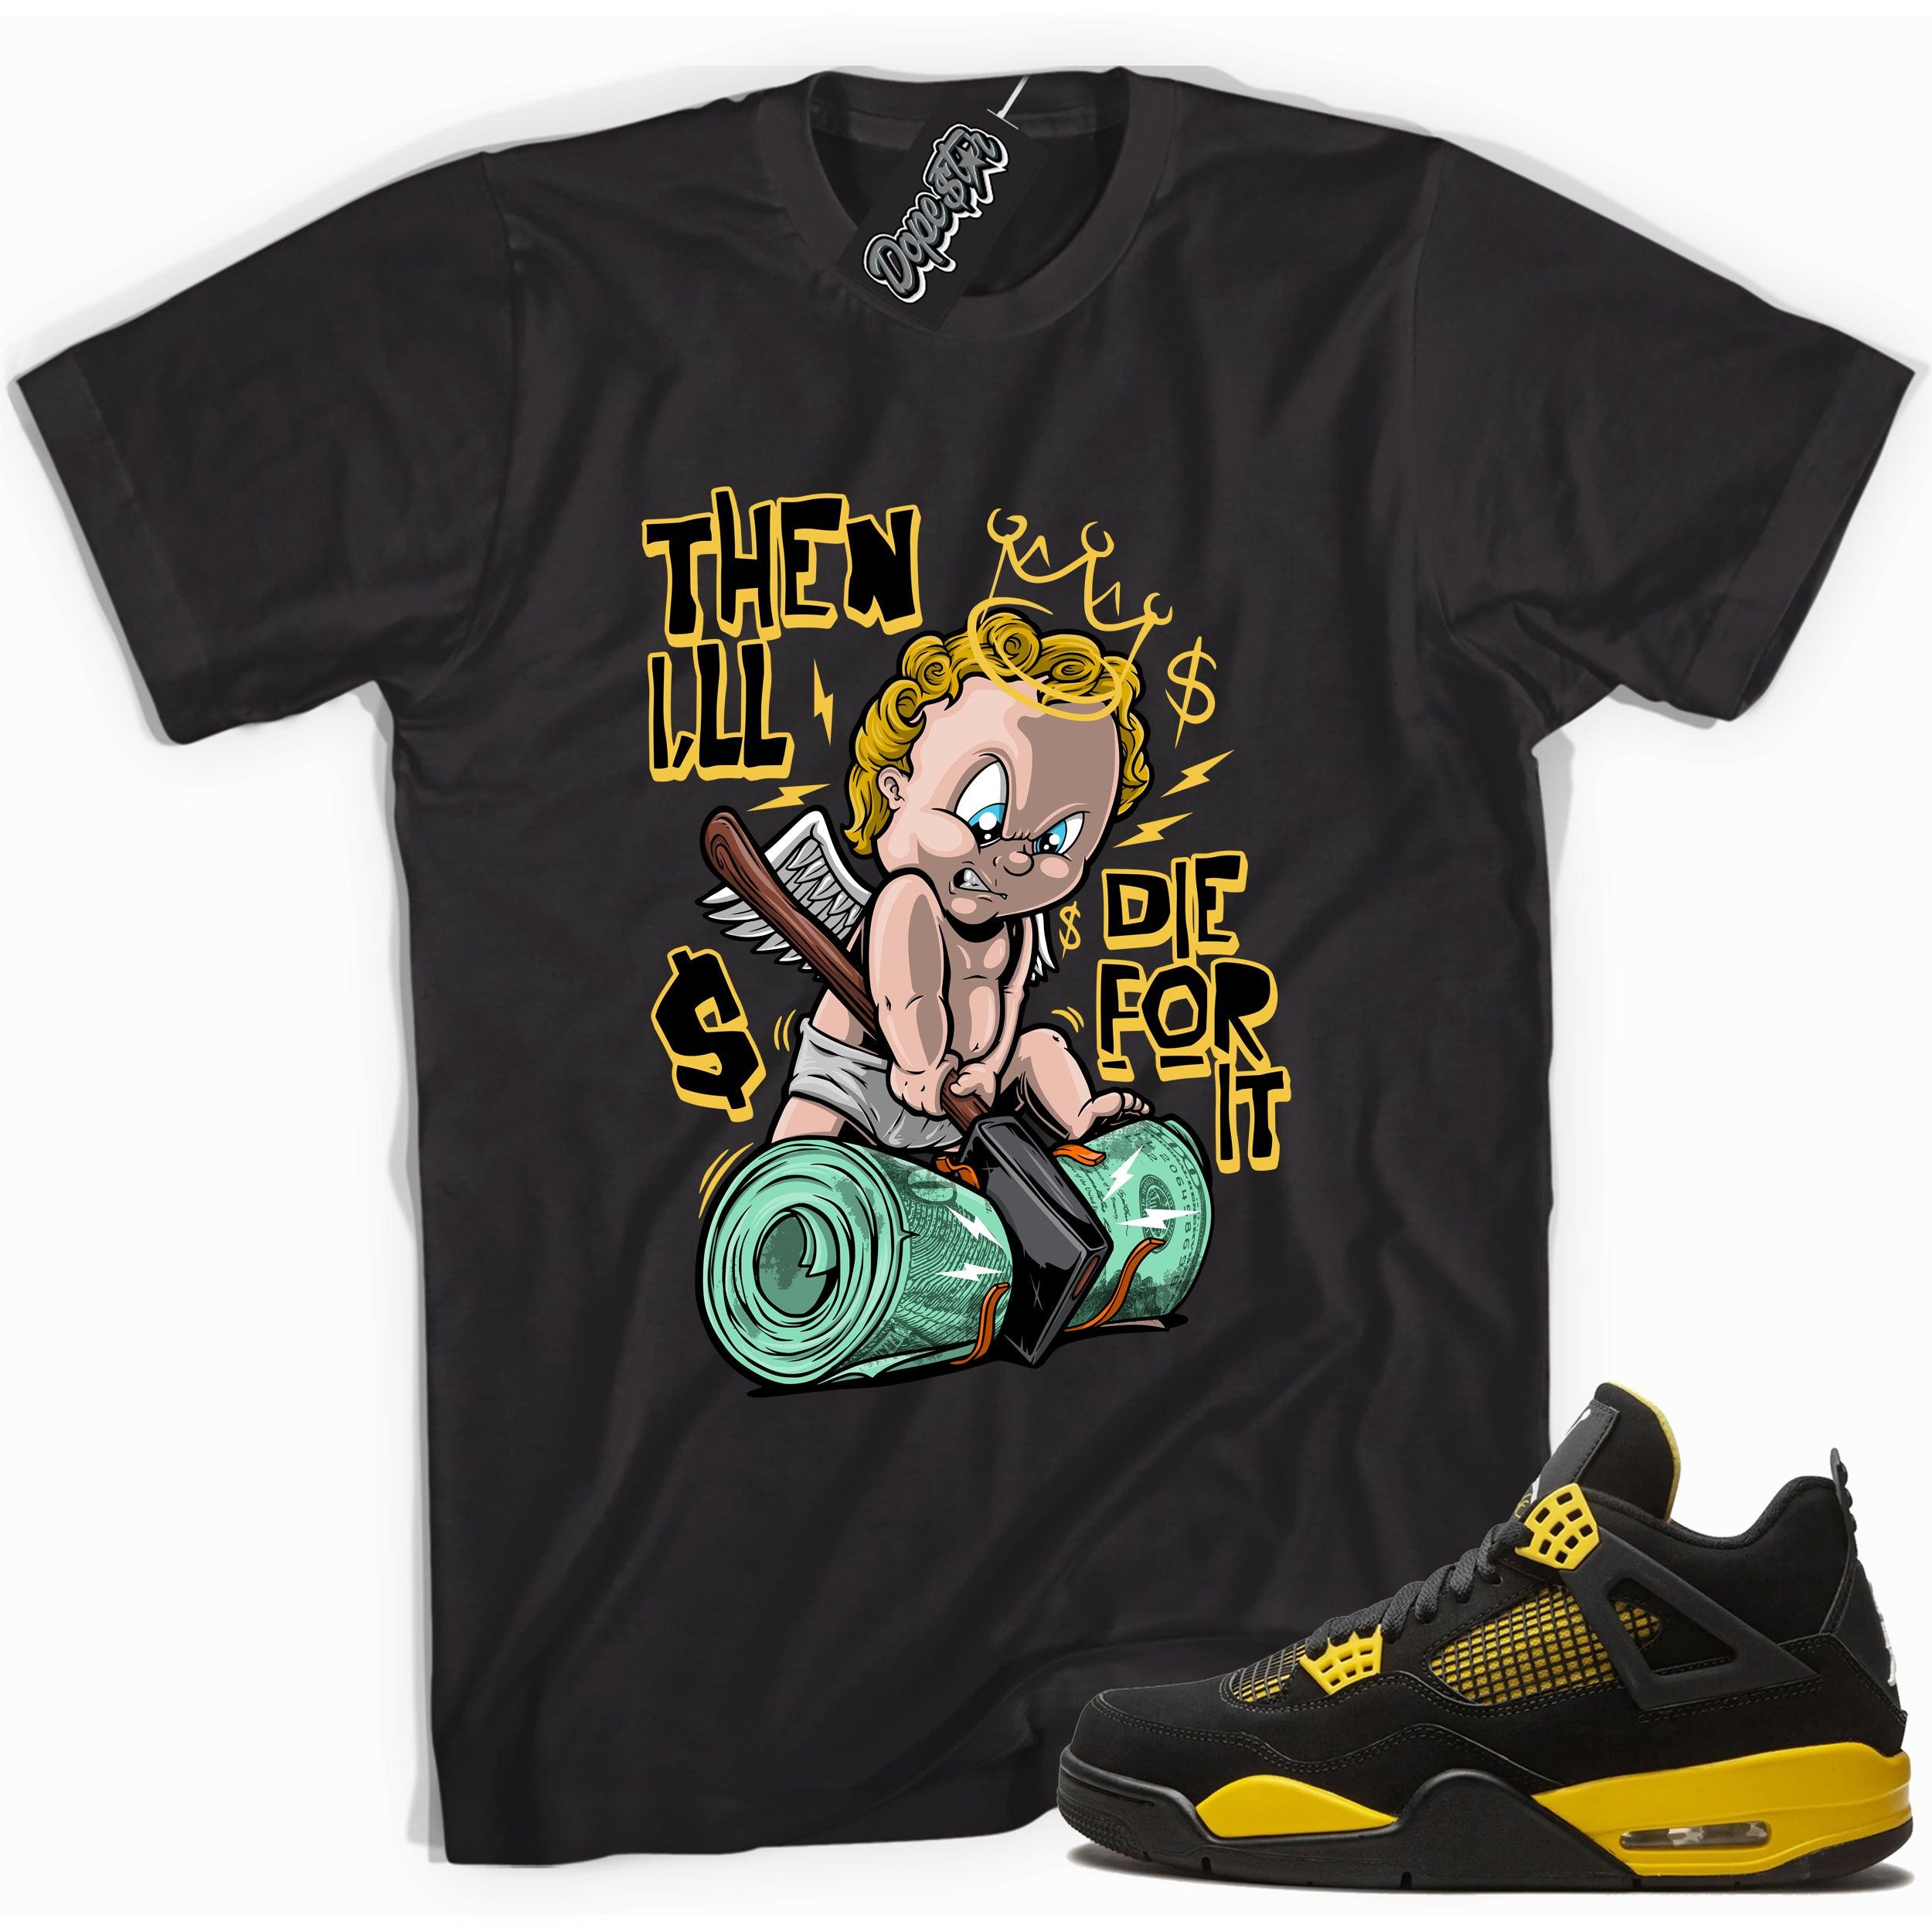 Cool black graphic tee with 'I’ll die for it' print, that perfectly matches  Air Jordan 4 Thunder sneakers